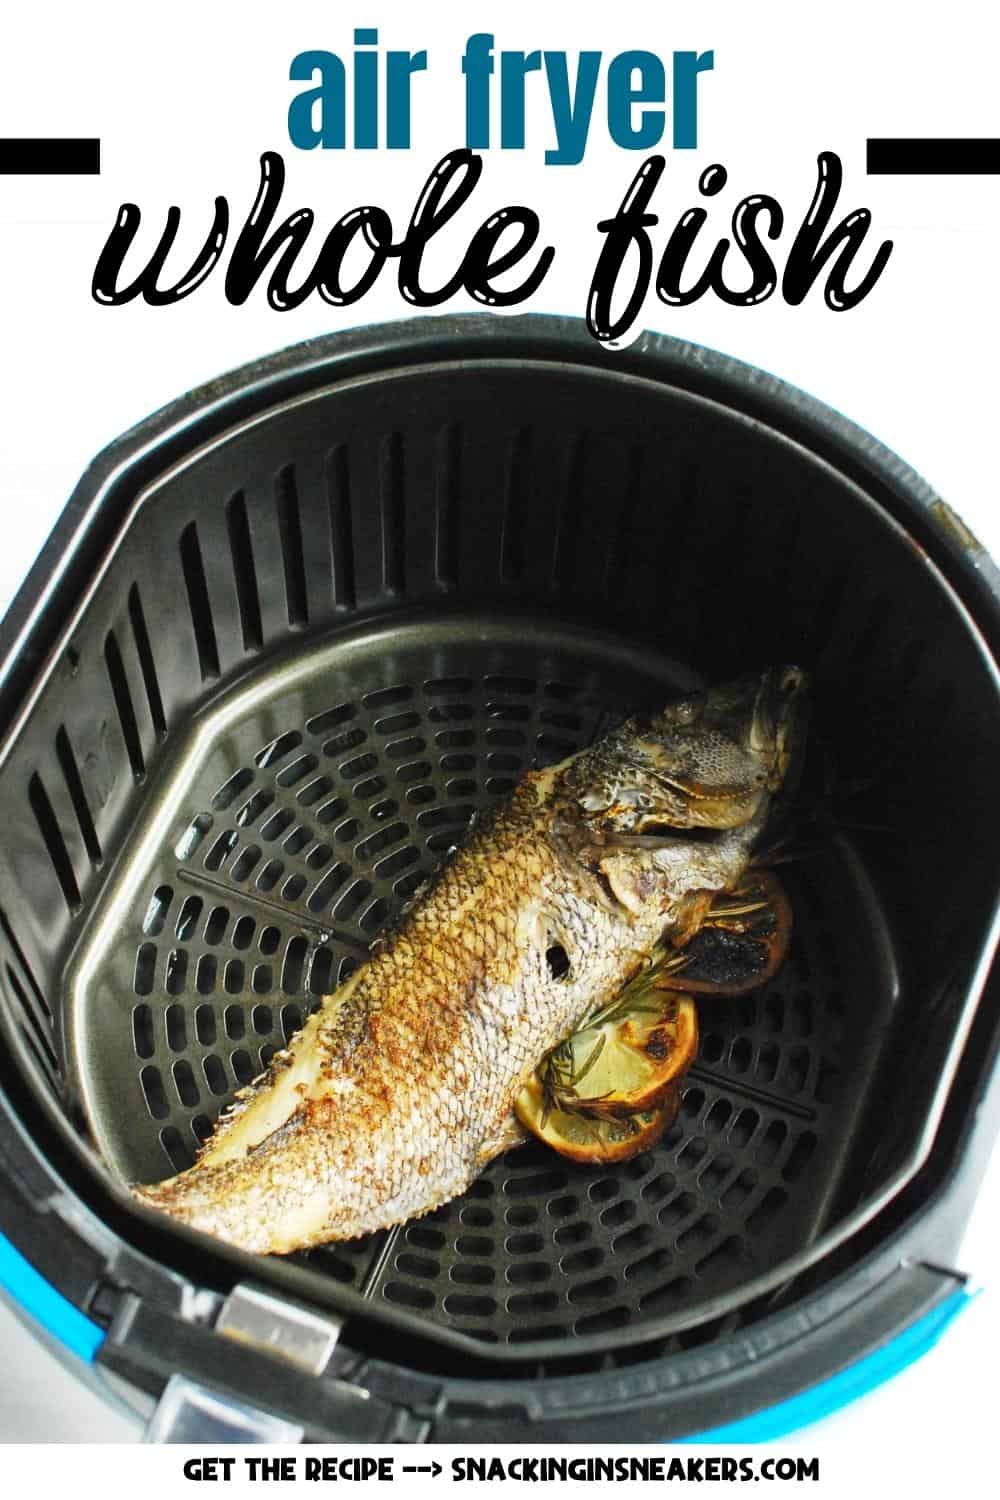 An air fryer basket with a cooked whole fish, with a text overlay with the name of the recipe.